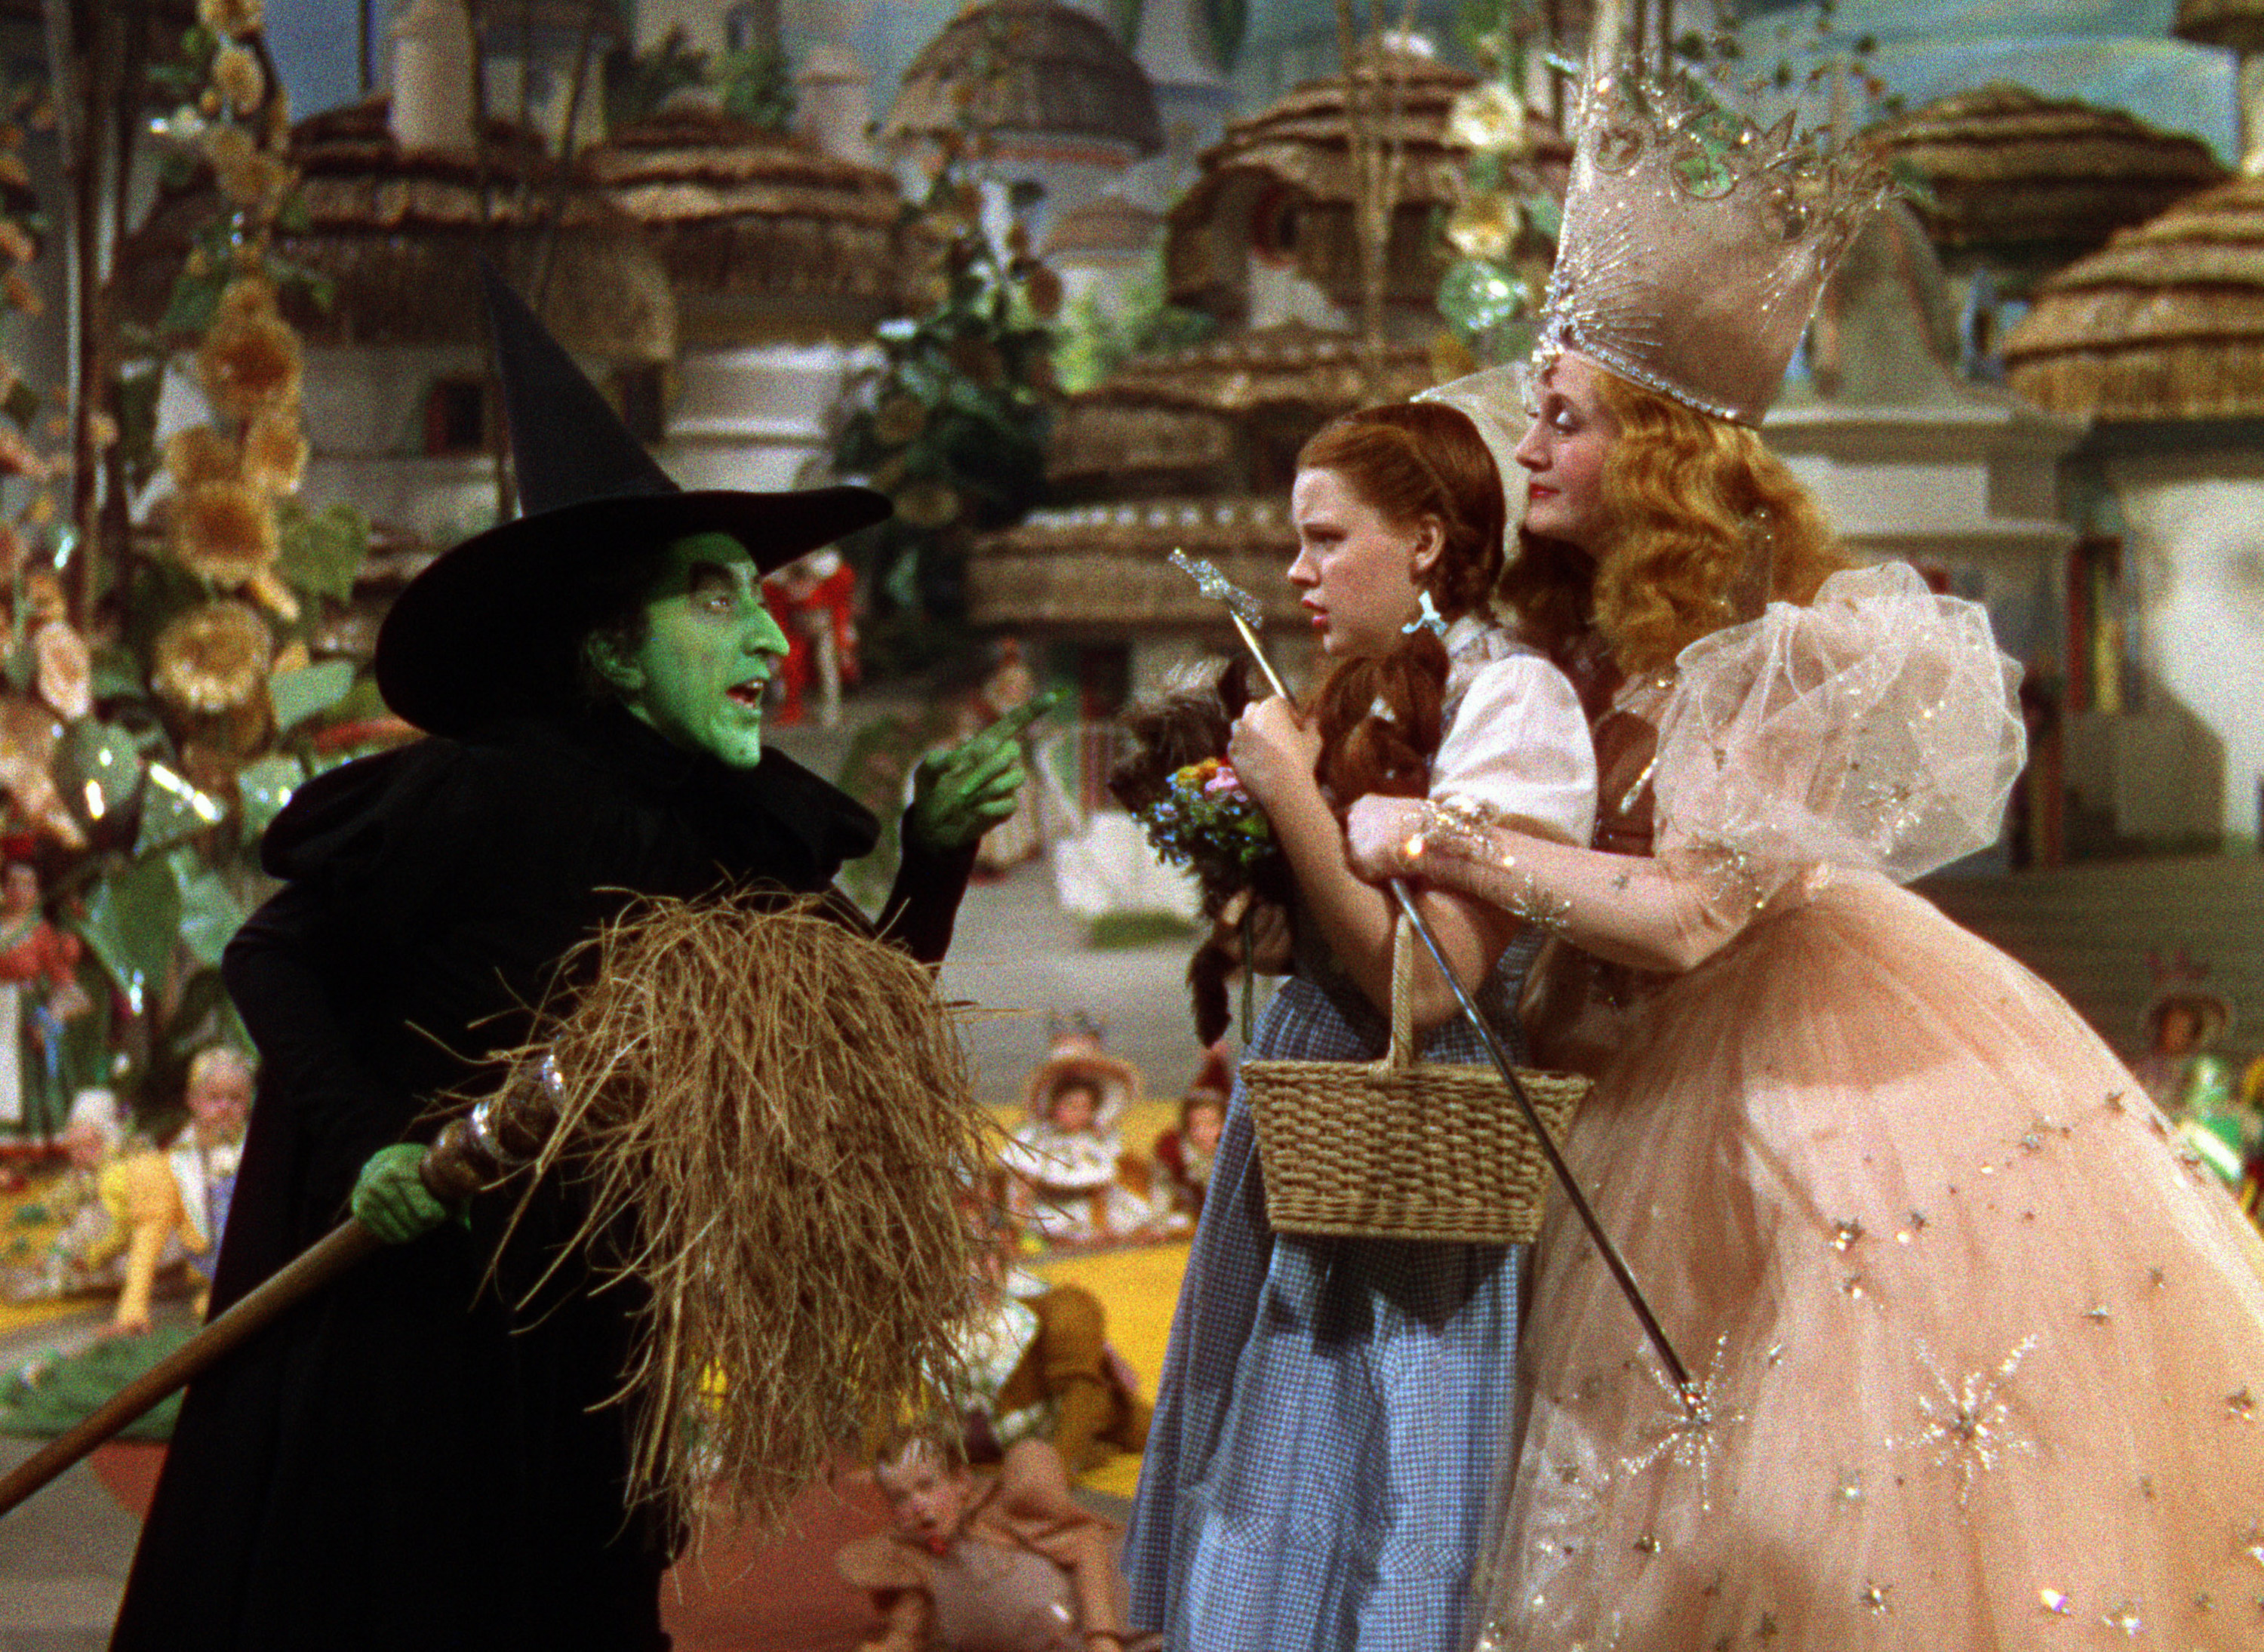 Margaret Hamilton as the Wicked Witch of the West threatens Judy Garland as Dorothy